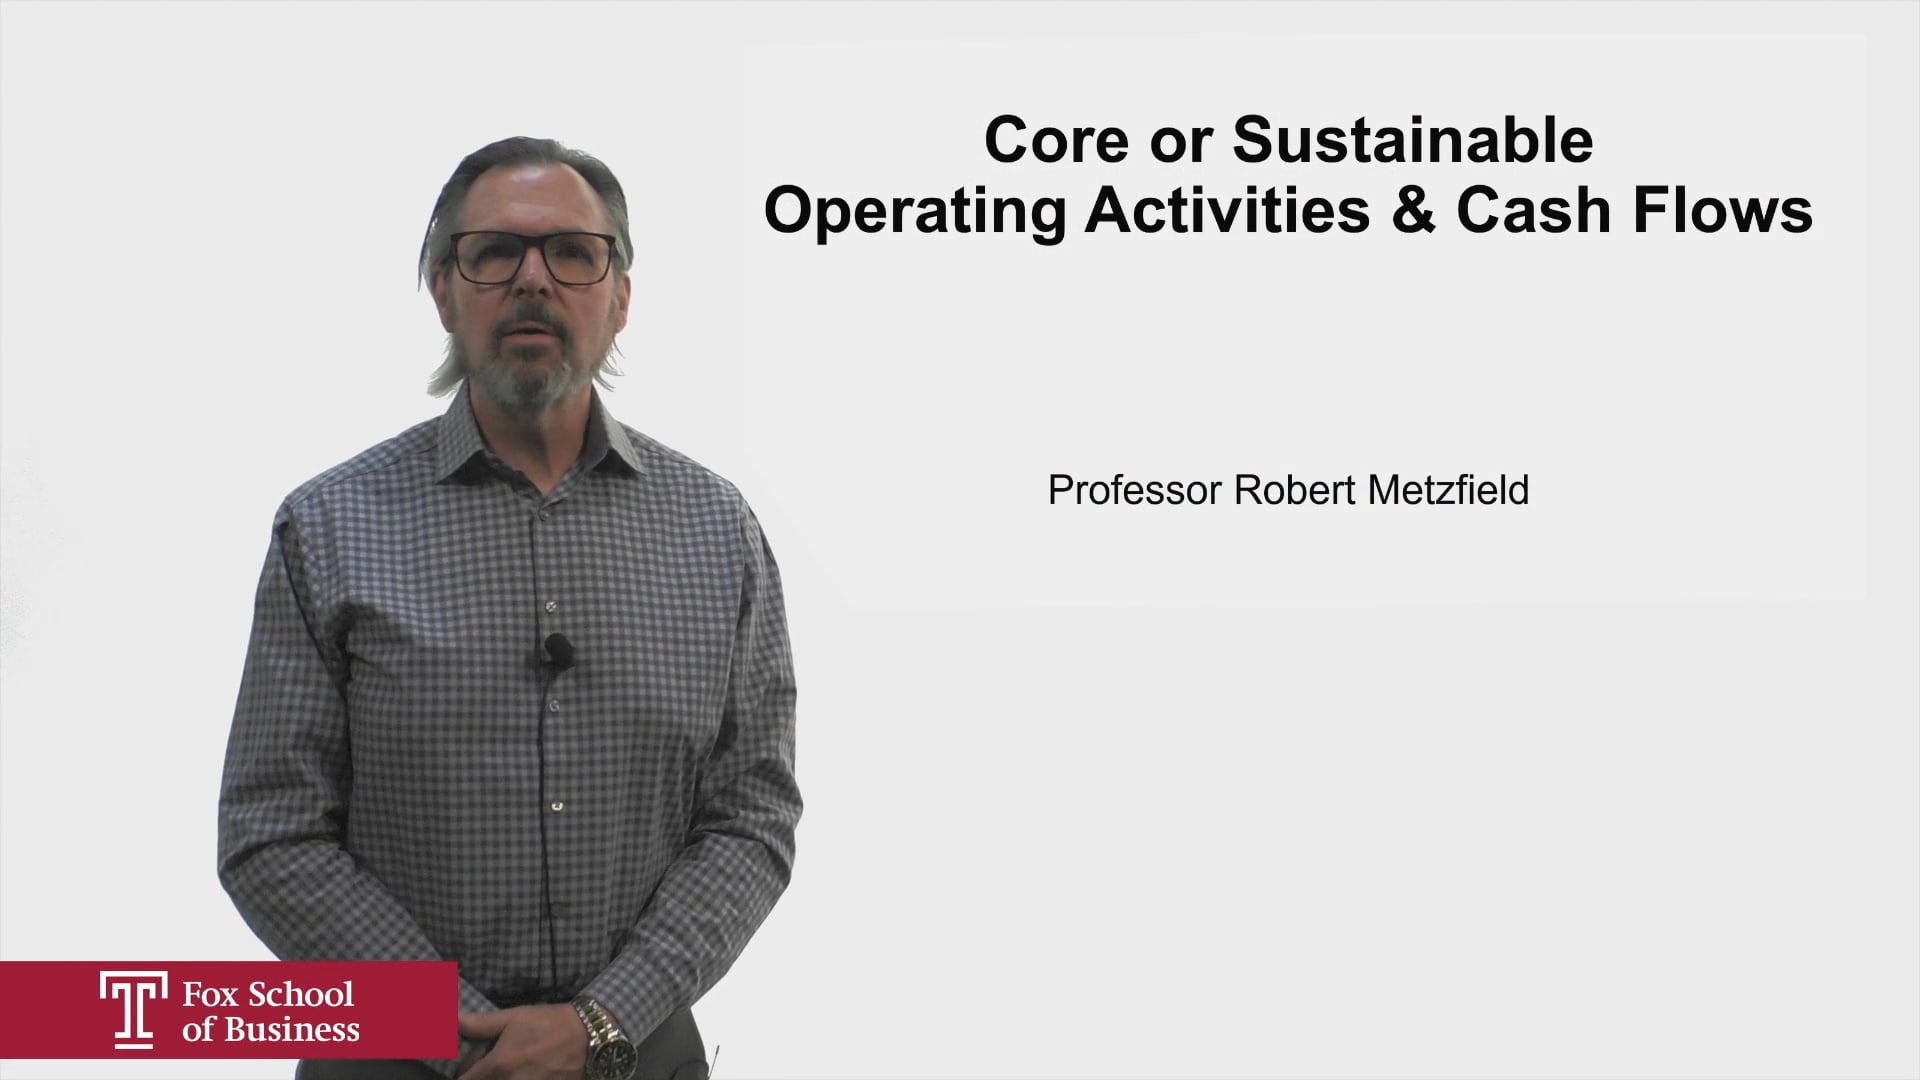 Core or Sustainable Operating Activities & Cash Flows